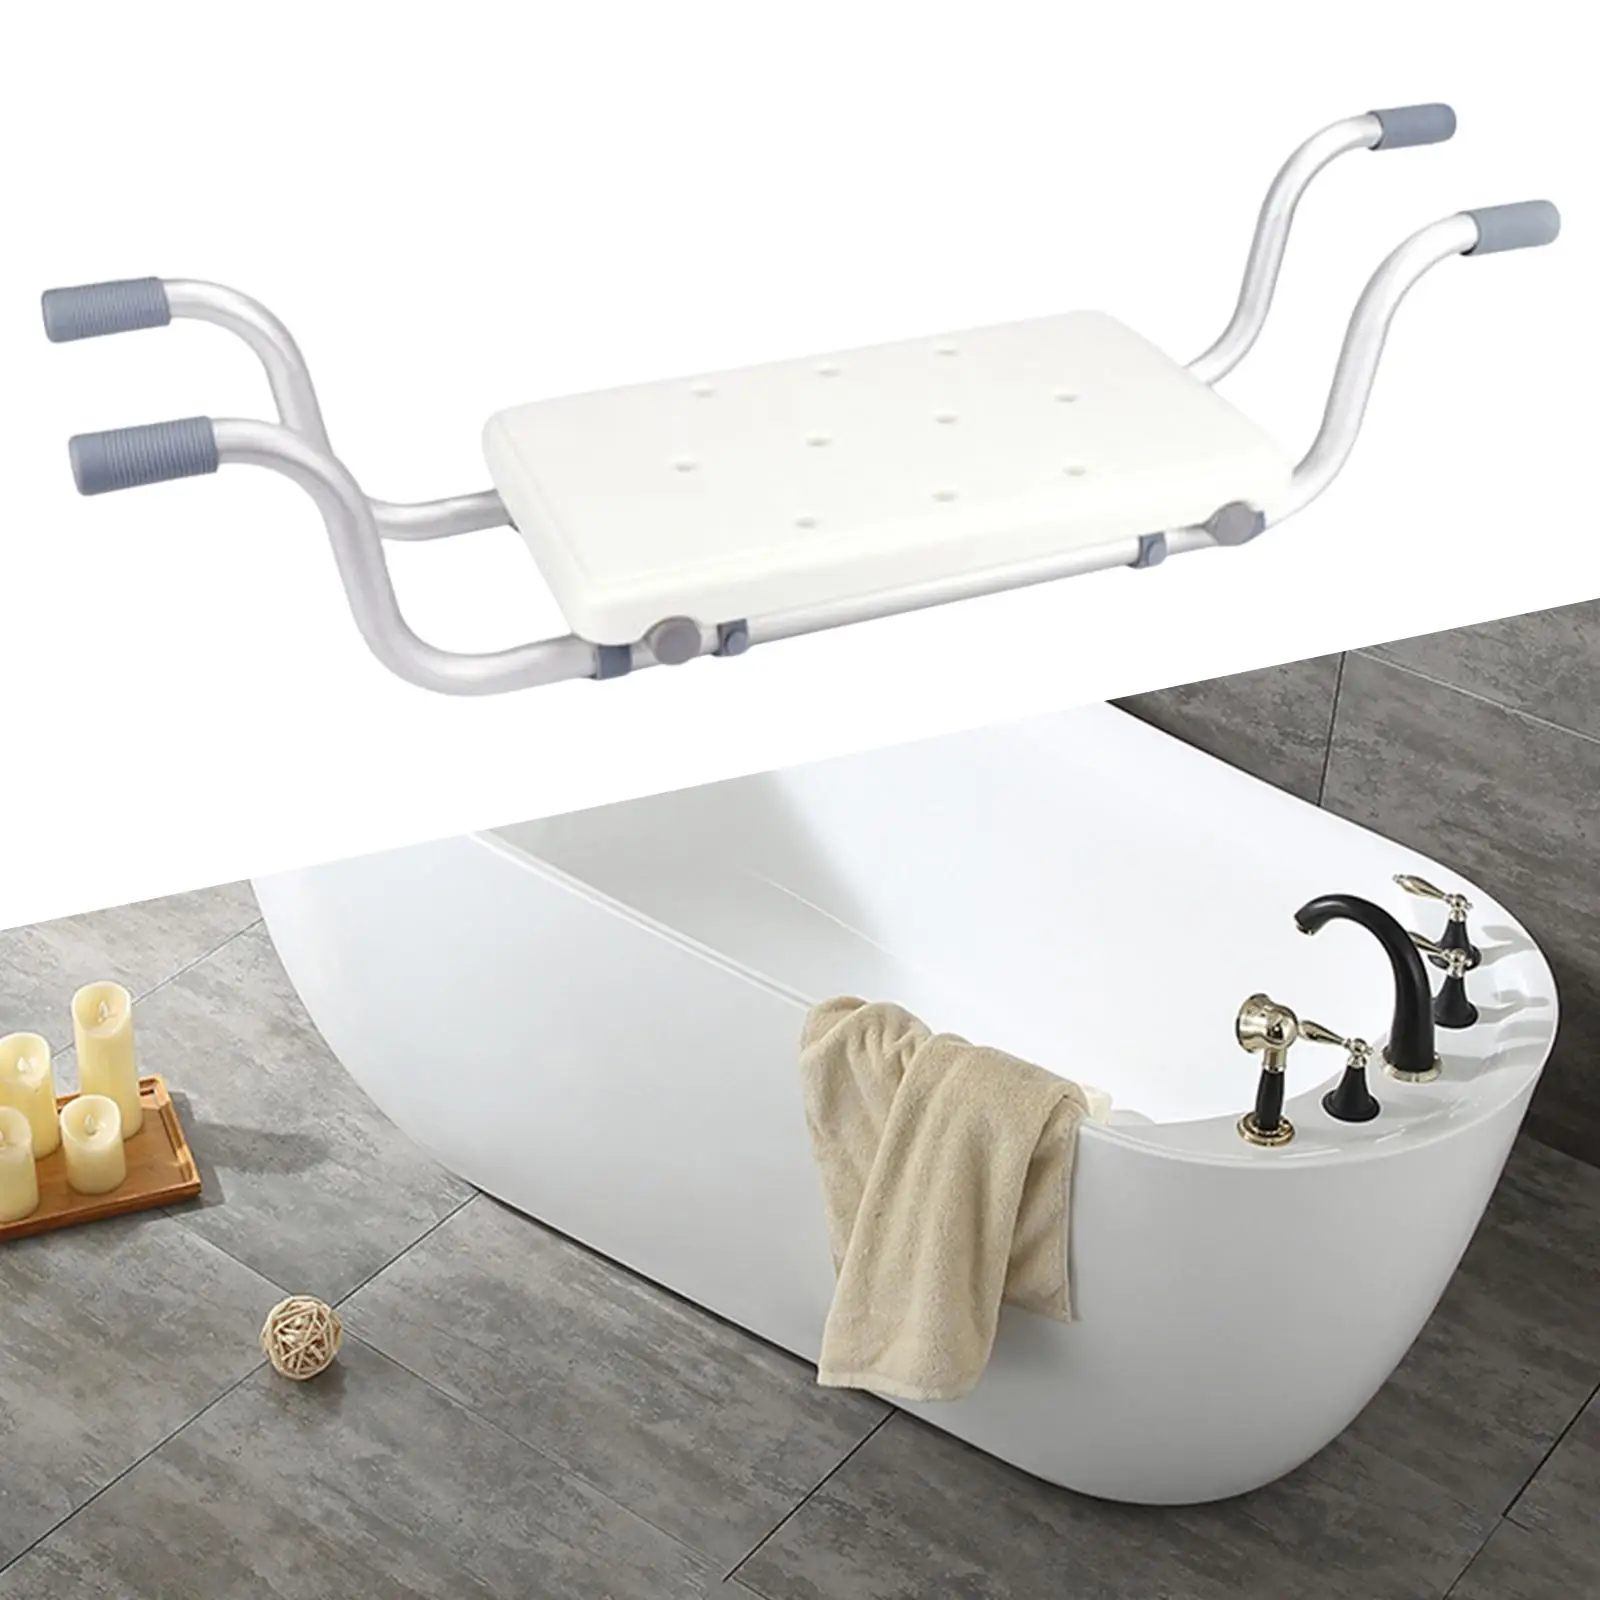 Bath Bench up to 130kg Weight Non Slip Transfer Bench Bathroom Shower Chair Bathtub Tray for Seniors Injured Easy Assembly White